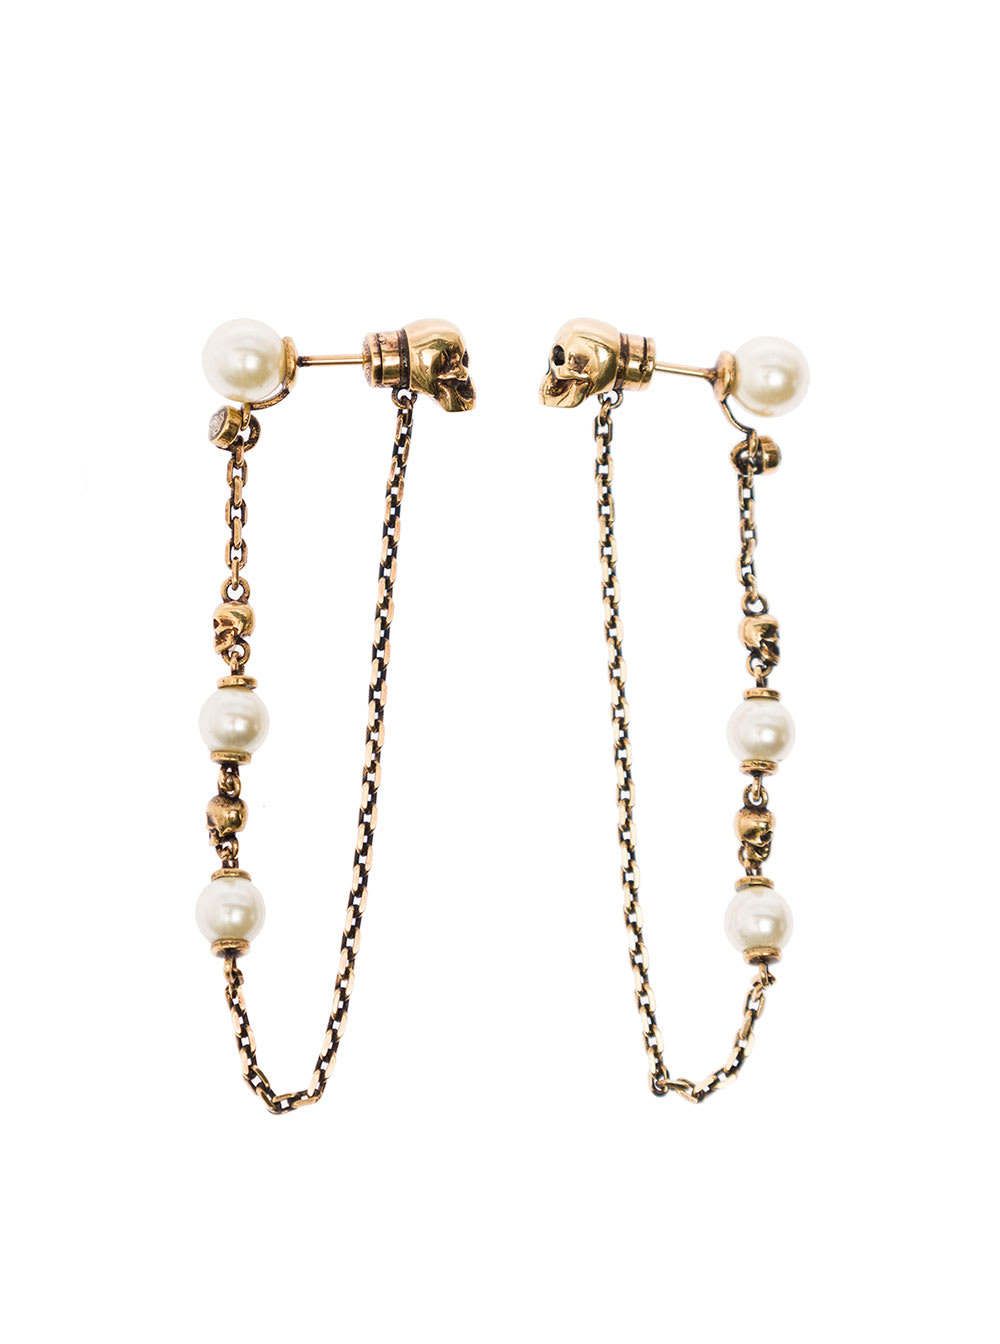 Antique Gold-finished Drop Chain Earring With Skulls And Pearls In Brass Woman Alexander Mcqueen